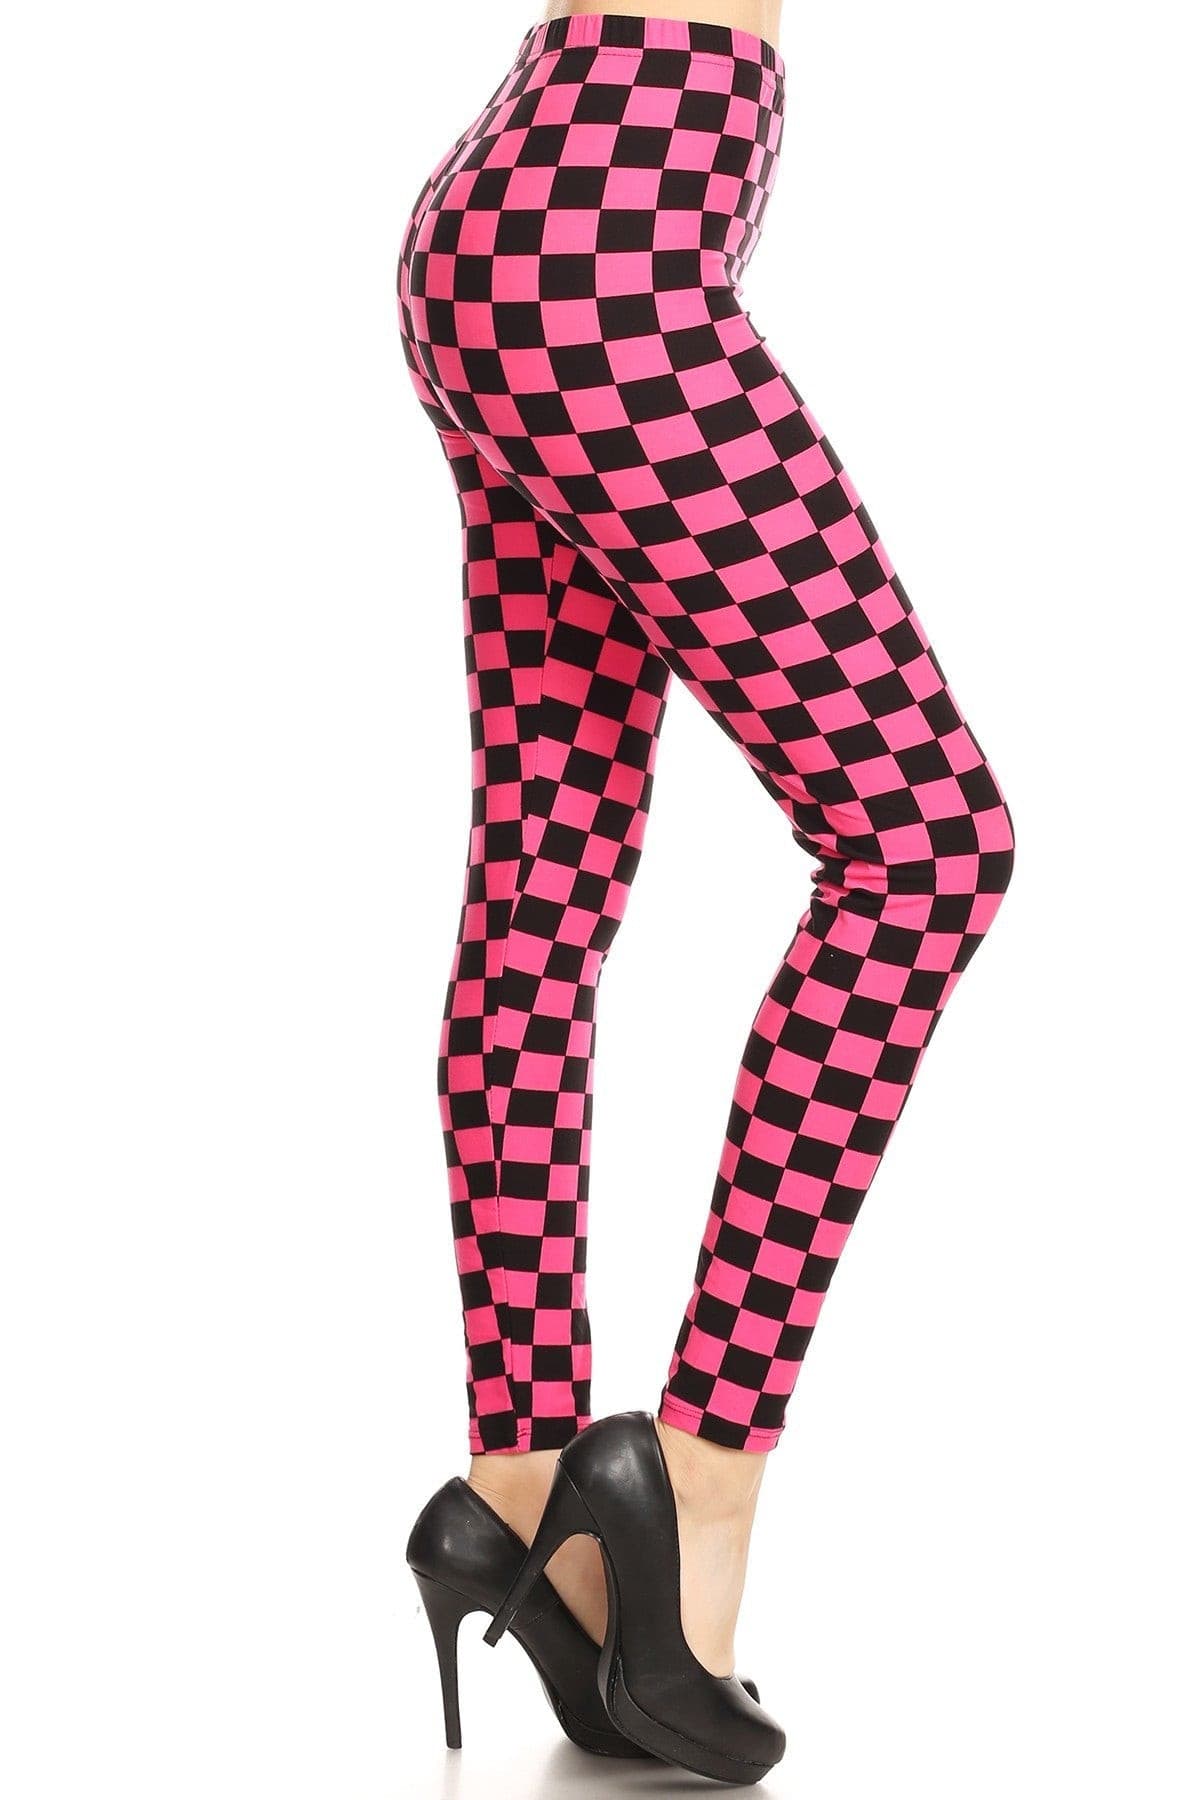 MULTI - Checkered Printed High Waisted Leggings - Ships from The US - womens leggings at TFC&H Co.